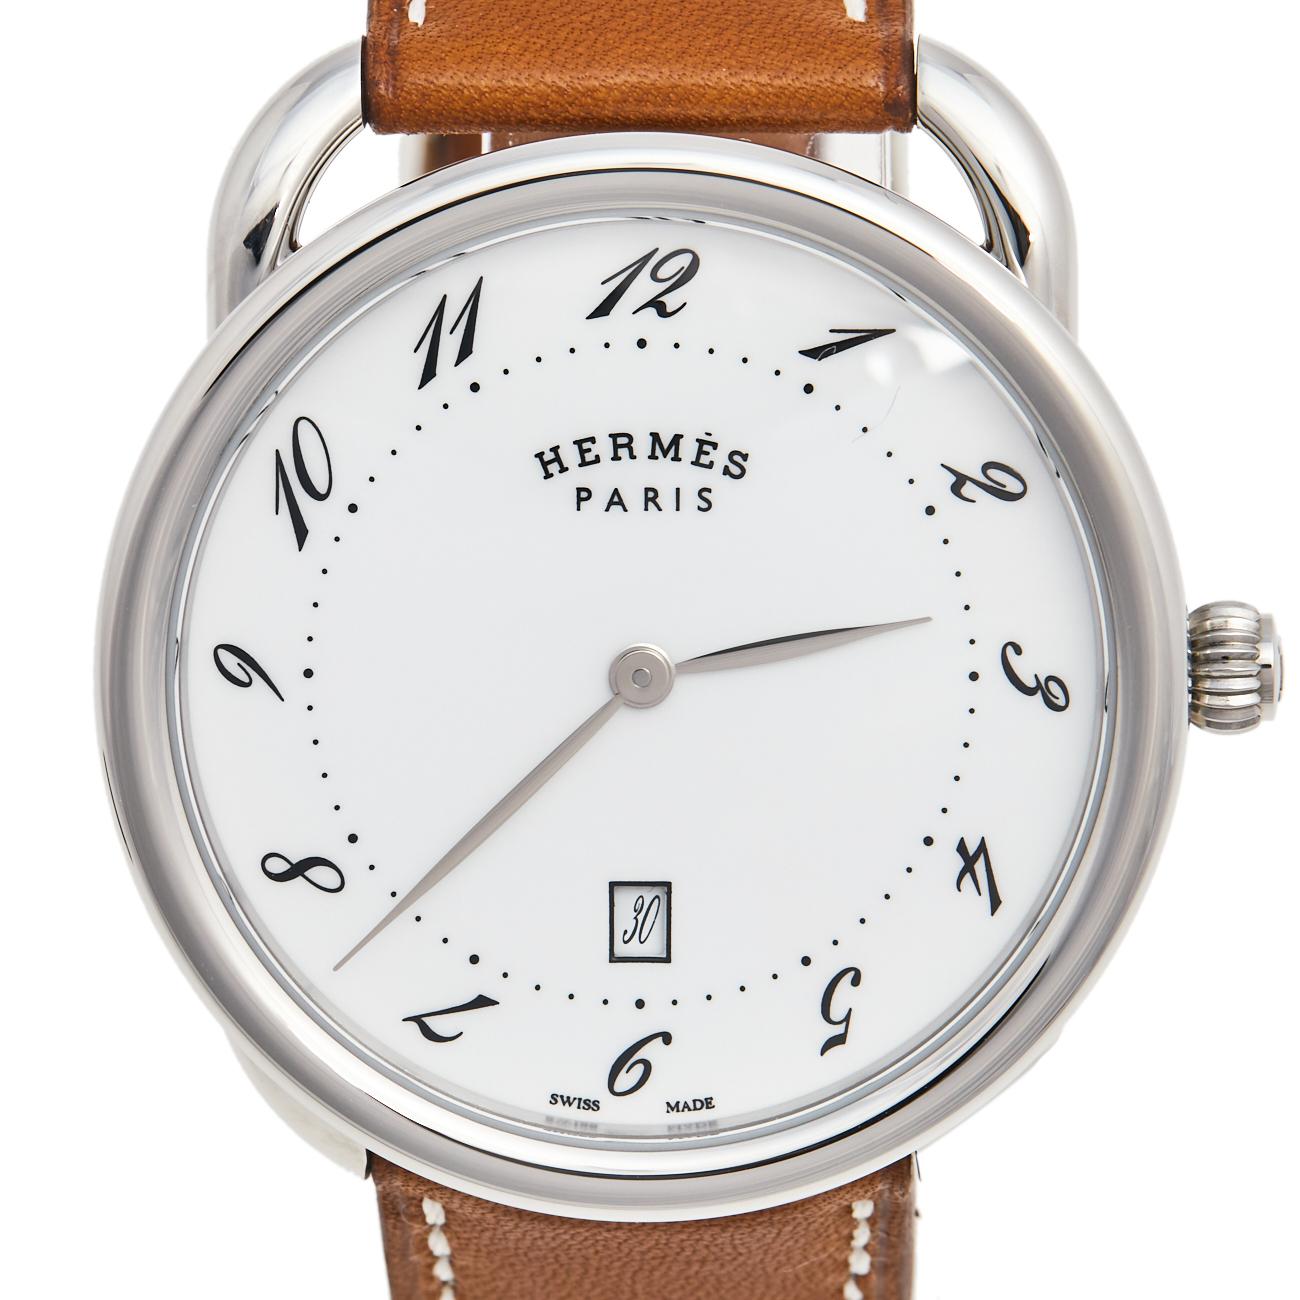 Hermes’ Arceau is a must-have piece in your coveted watch collection. It is designed to effortlessly deliver a luxurious appeal. The watch has a stainless steel case with a smooth bezel and a white dial that is easily readable. A comfortable leather